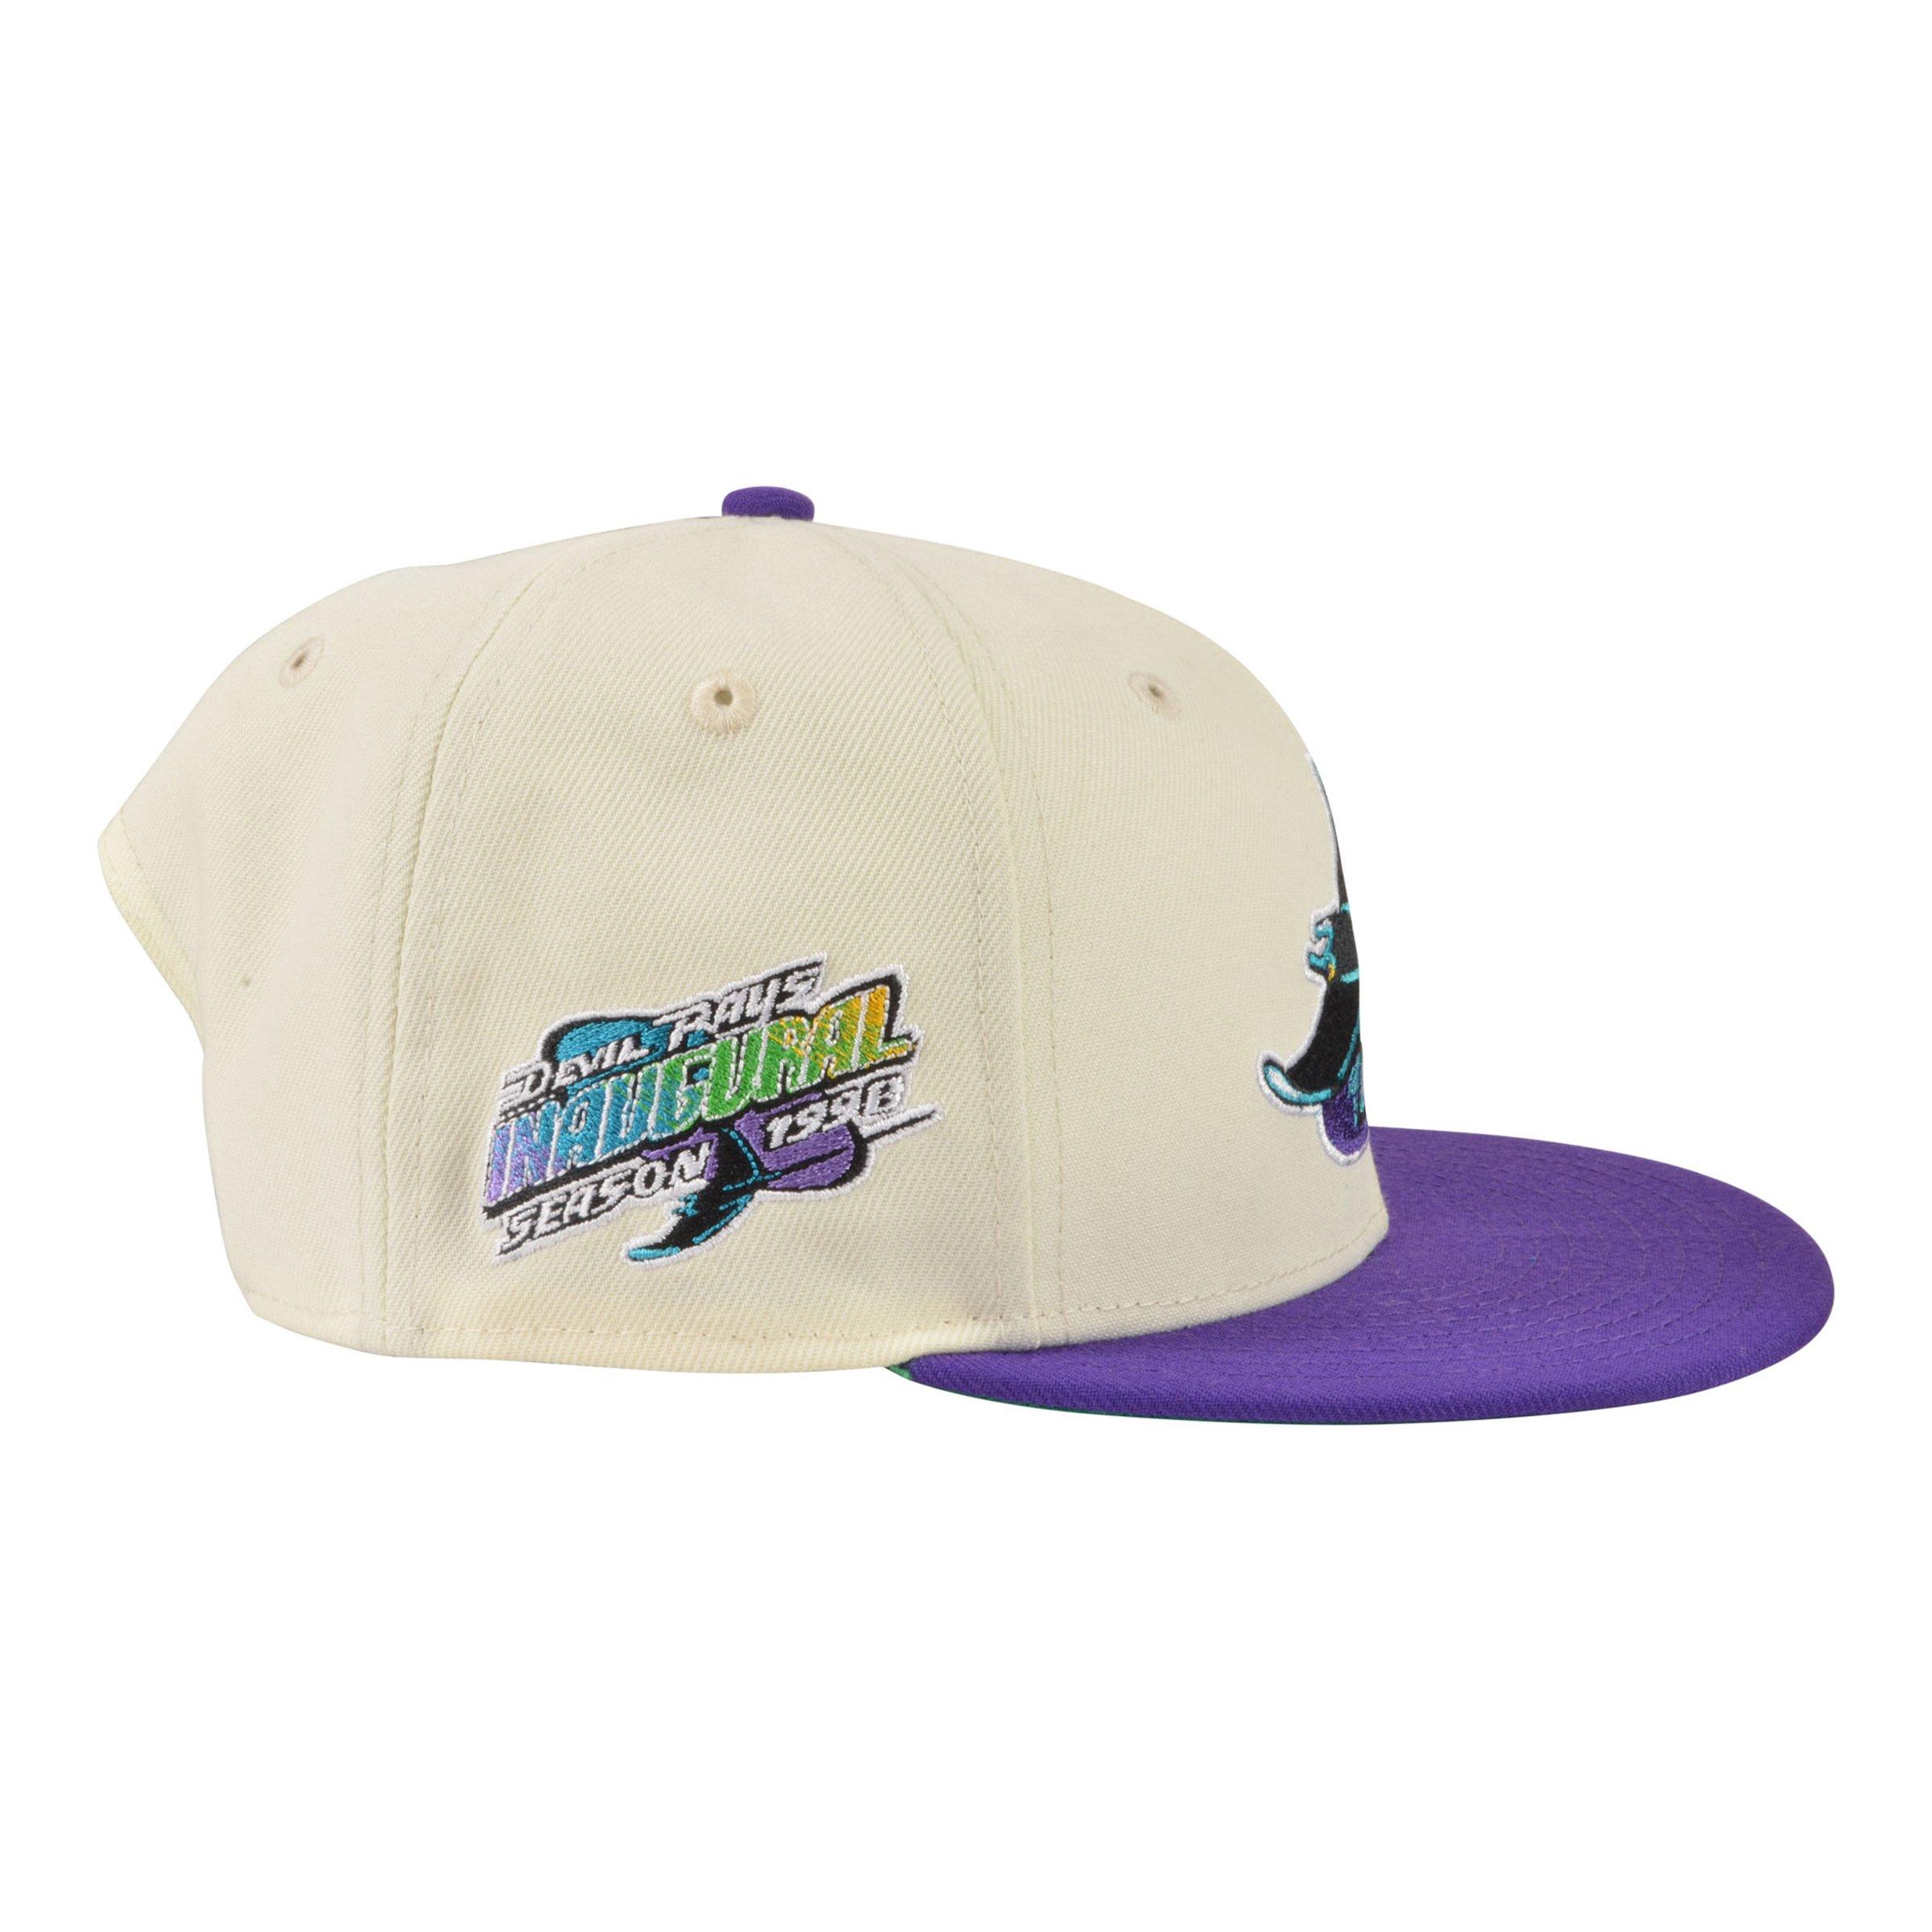 RAYS LIME AND LAVENDER DEVIL RAYS ALT NEW ERA 9FIFTY SNAPBACK HAT